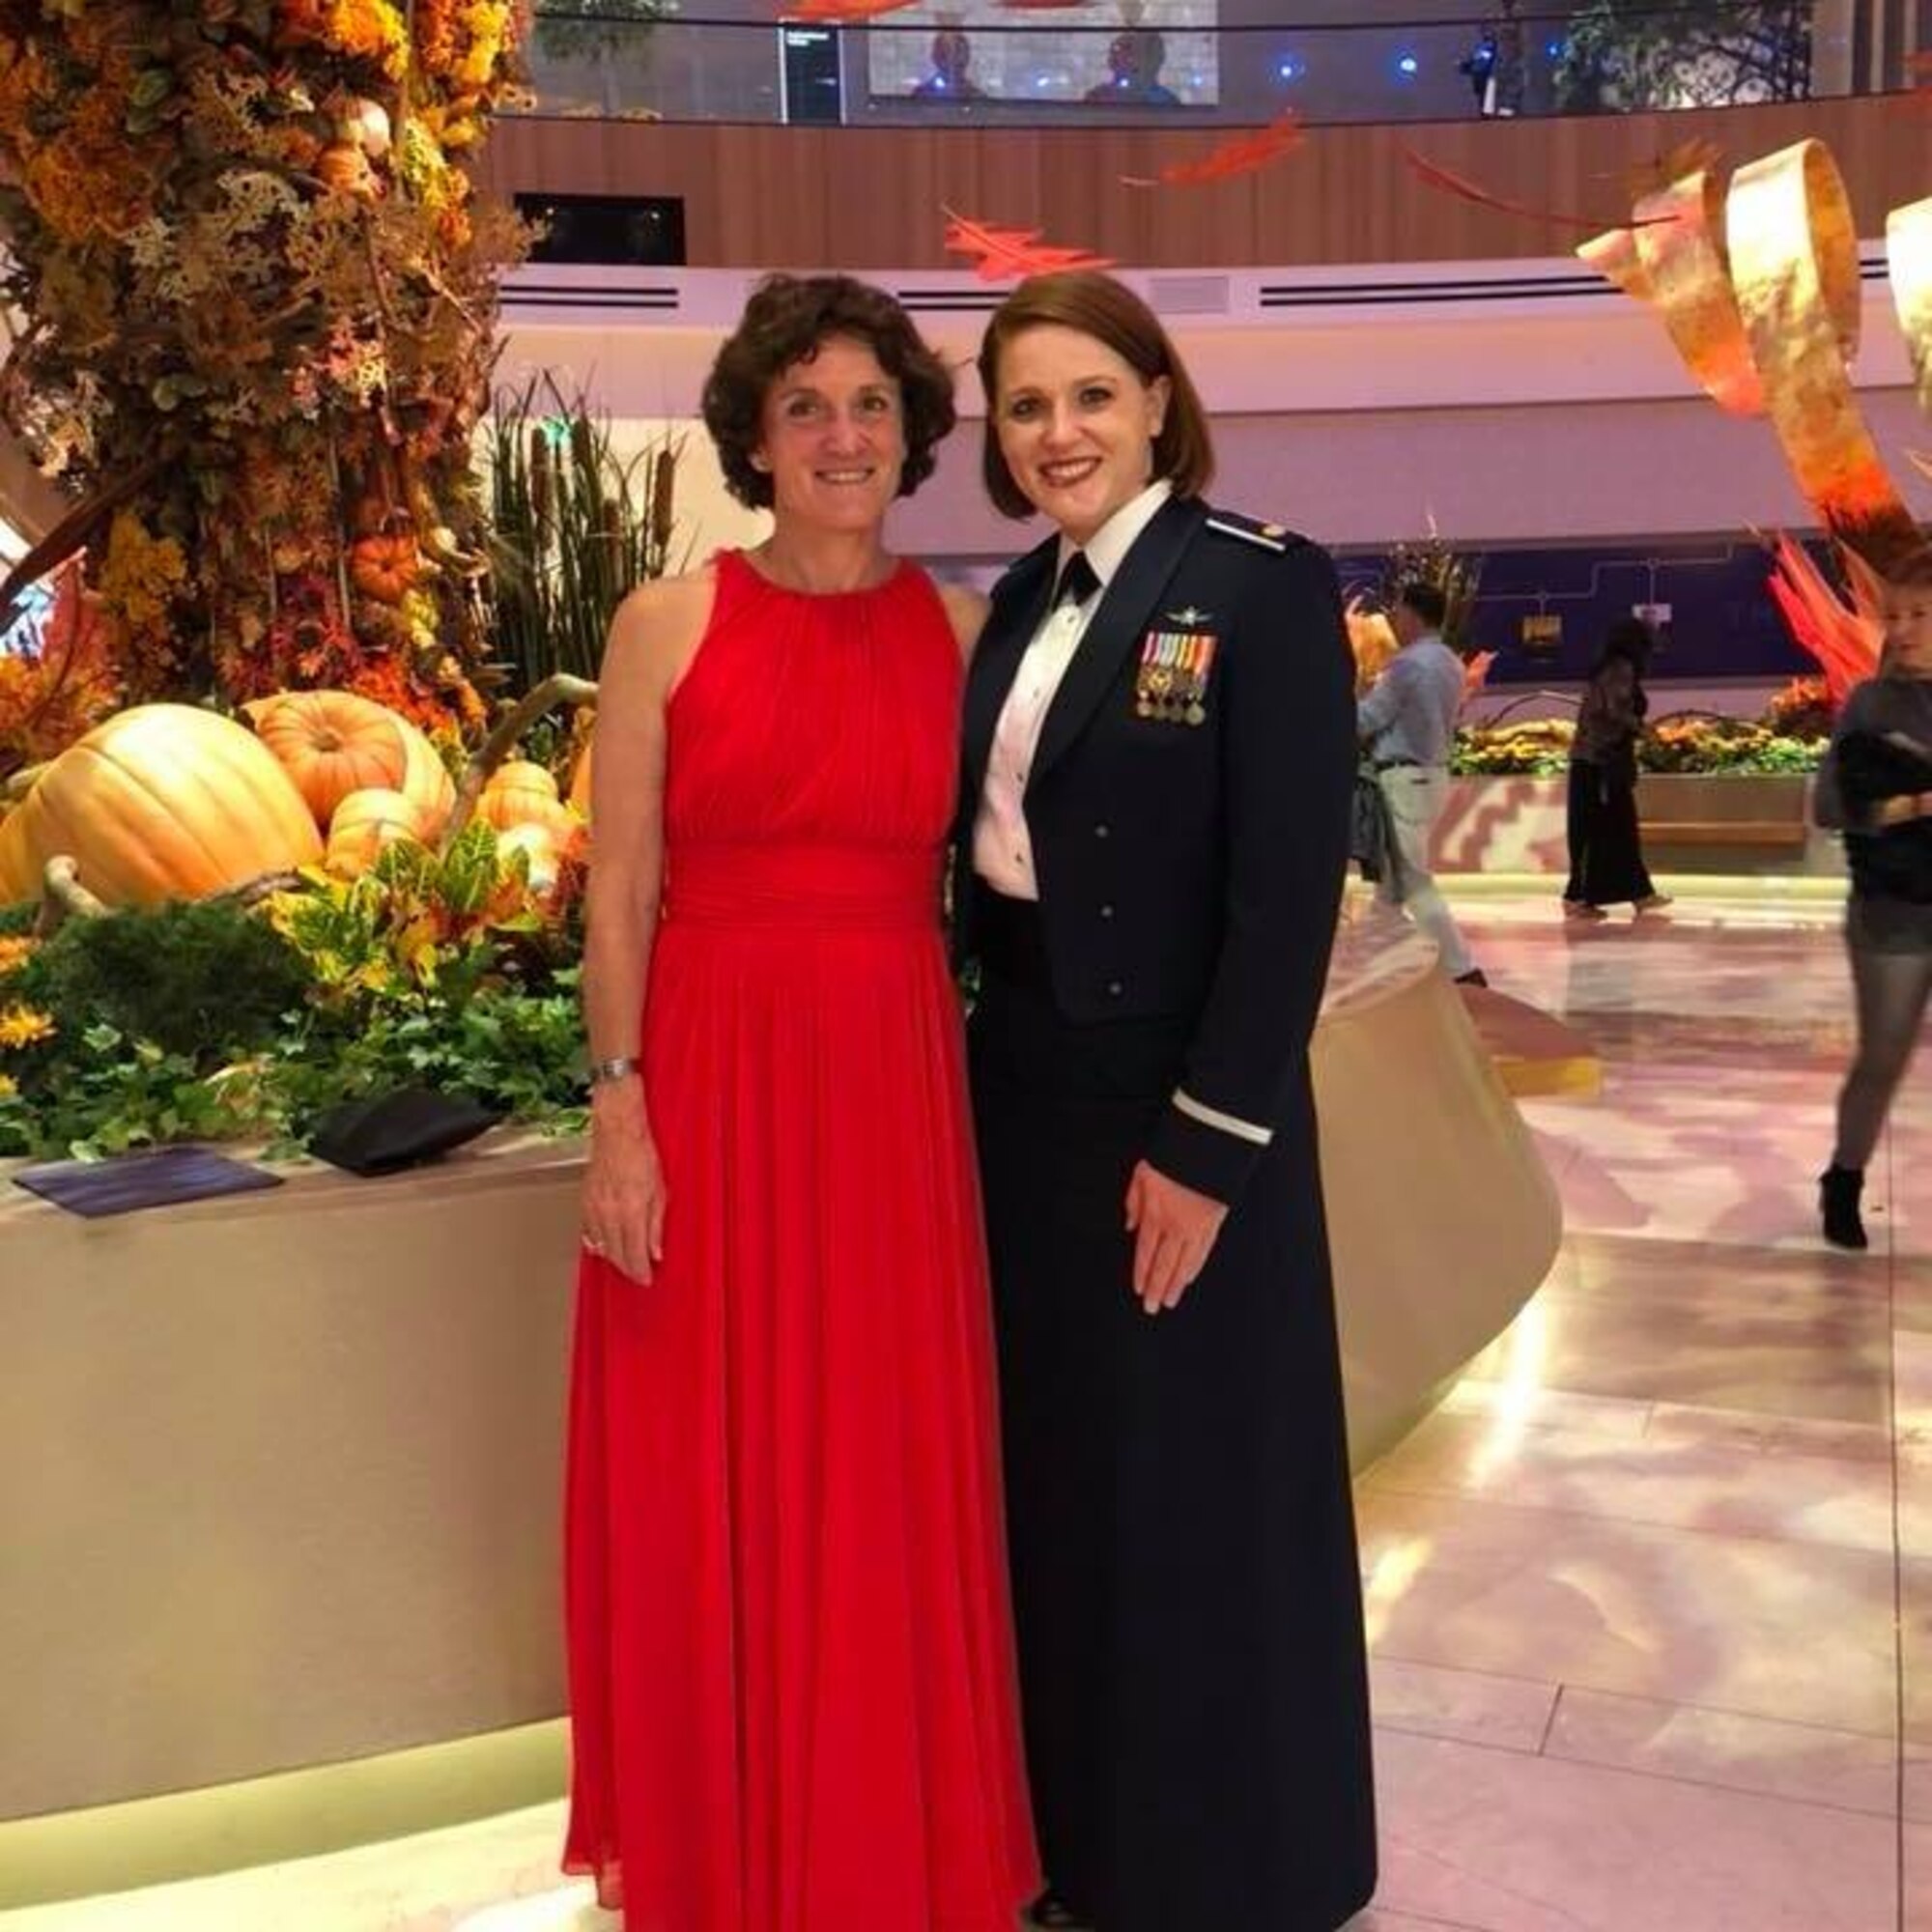 Linda Ambard, left, and her daughter, Maj. Emily Short, attended the Air Force Symposium dinner Sept. 19, for the unveiling of the Gold Star Family video. Produced by the Profession of Arms Center of Excellence, Ambard, whose husband was killed in Afghanistan in 2011, did the voice over work for the Gold Star video. Ambard is a Violence Prevention Integrator at the 509th Bomb Wing at Whiteman Air Force Base, Missouri; and Short is assigned to MacDill AFB, Florida. (courtesy photo)